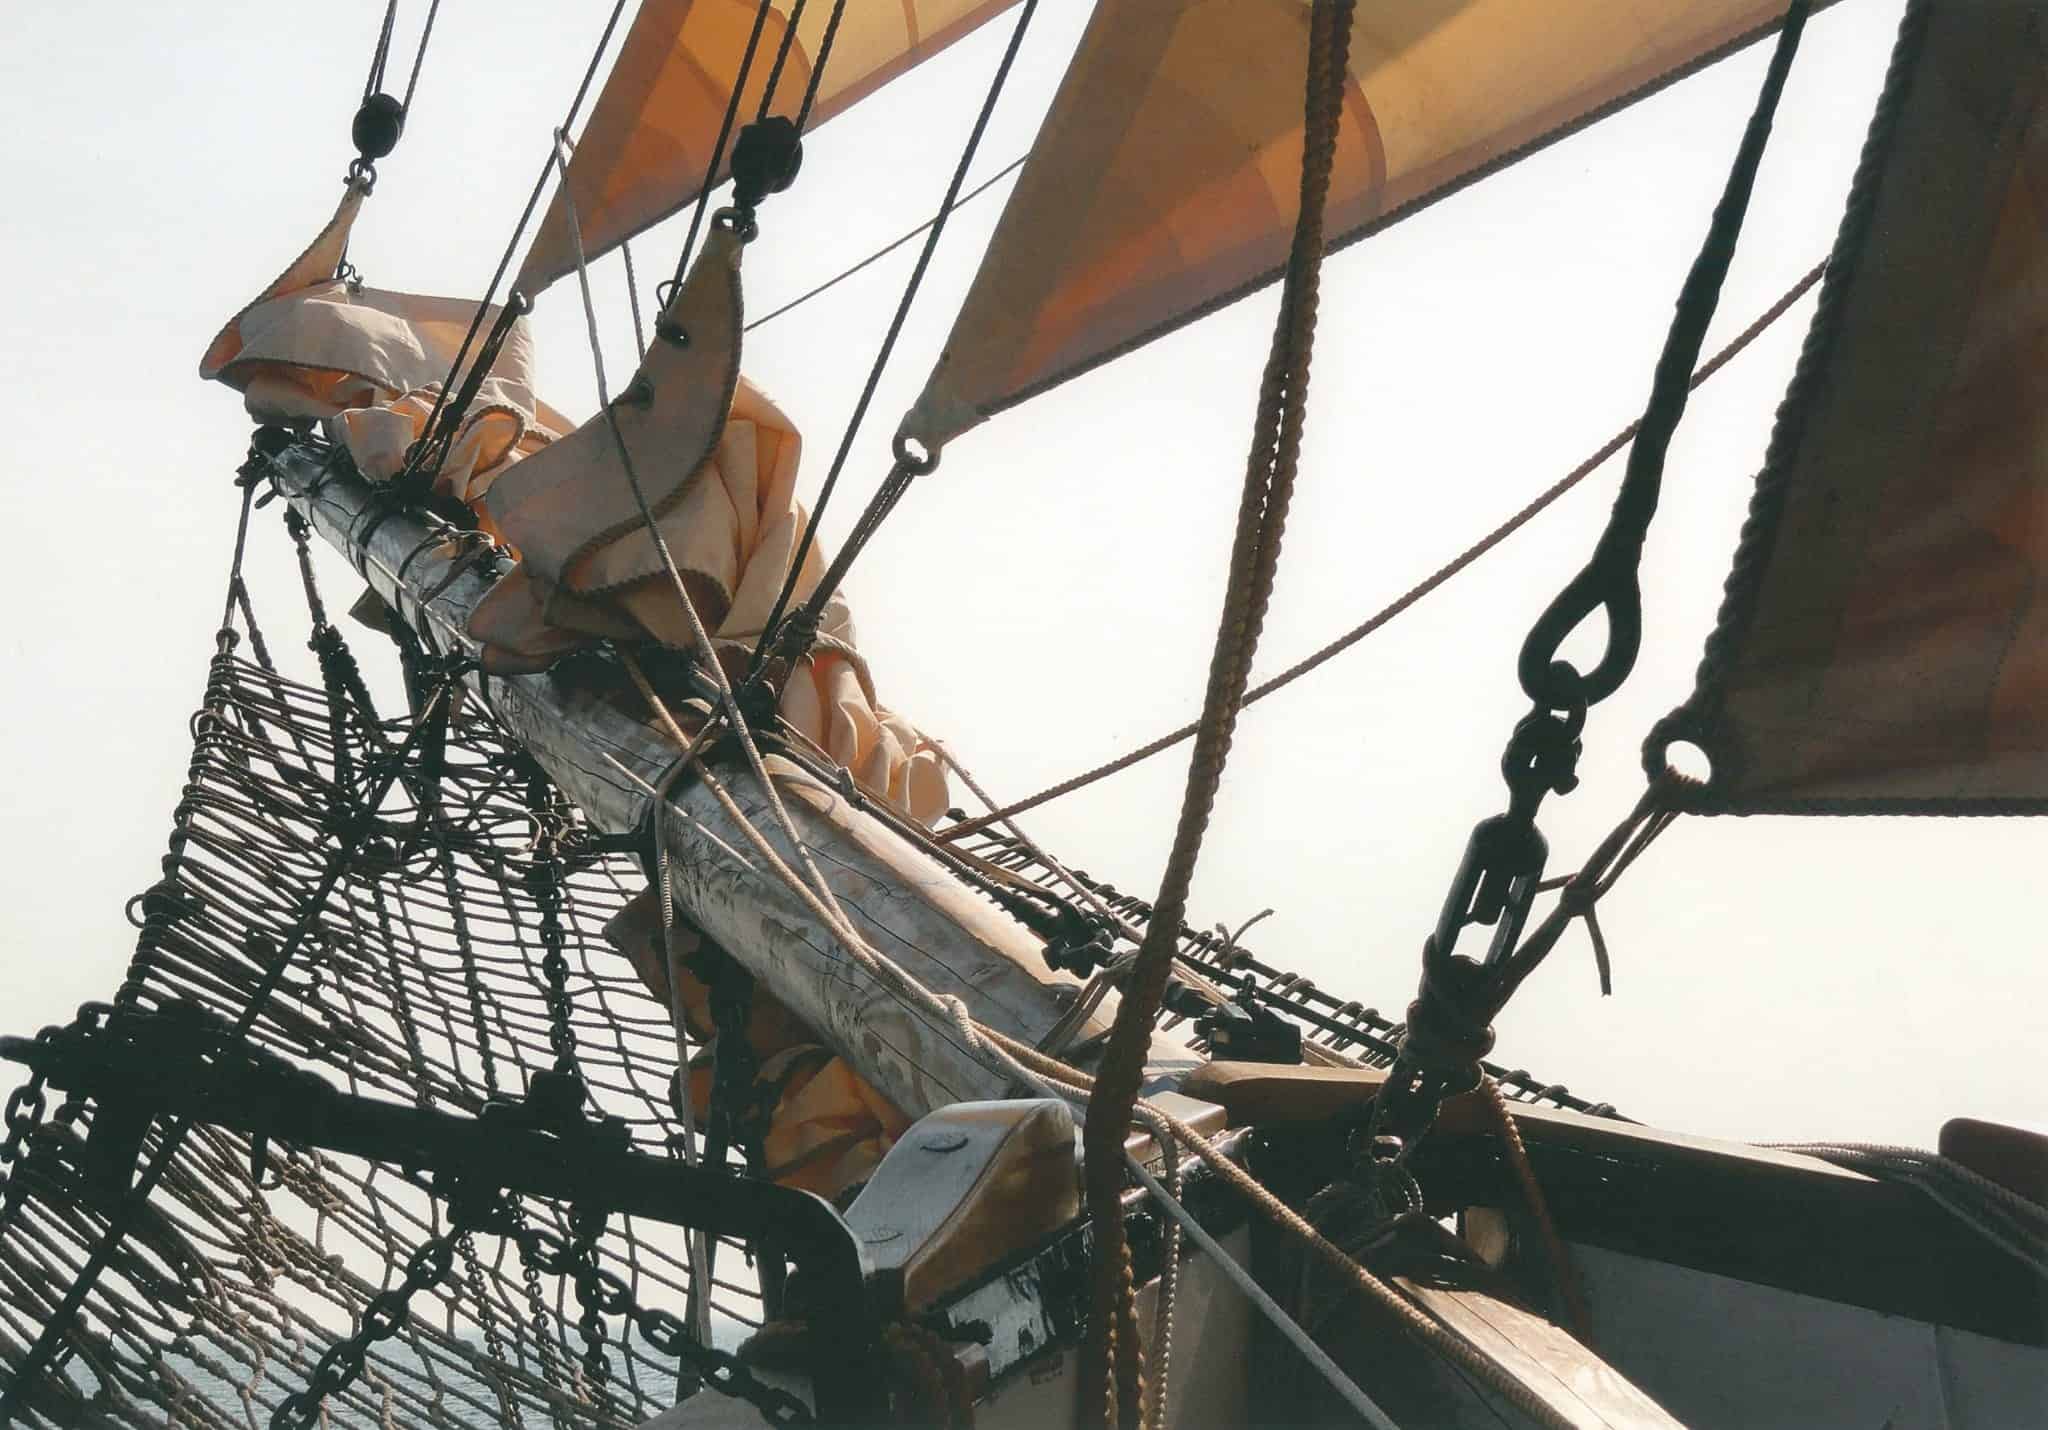 The Bolt Rope located in the headsail and is one of the Ropes on a Sailing Boat